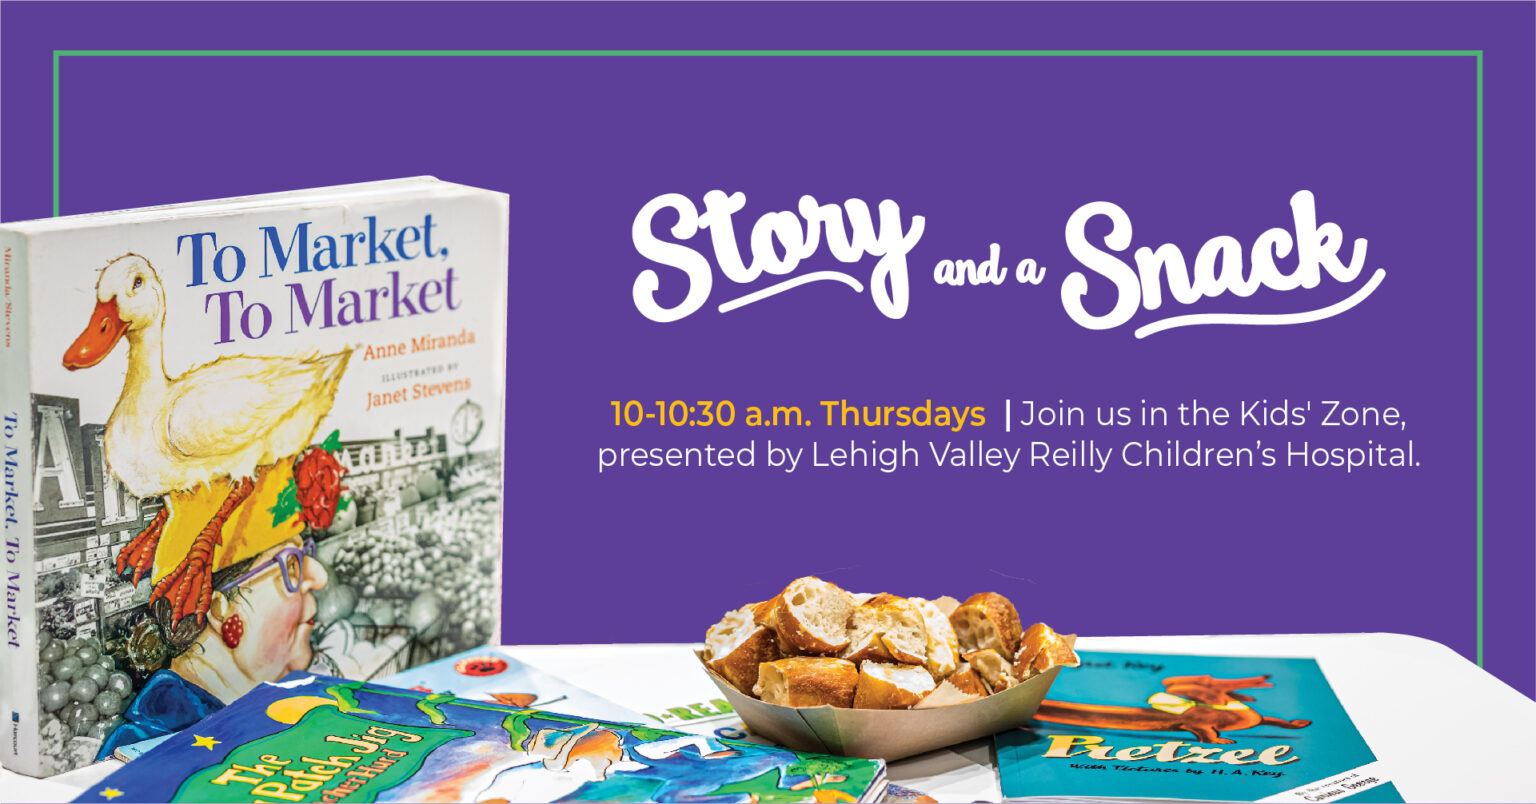 Story and a Snack is back!